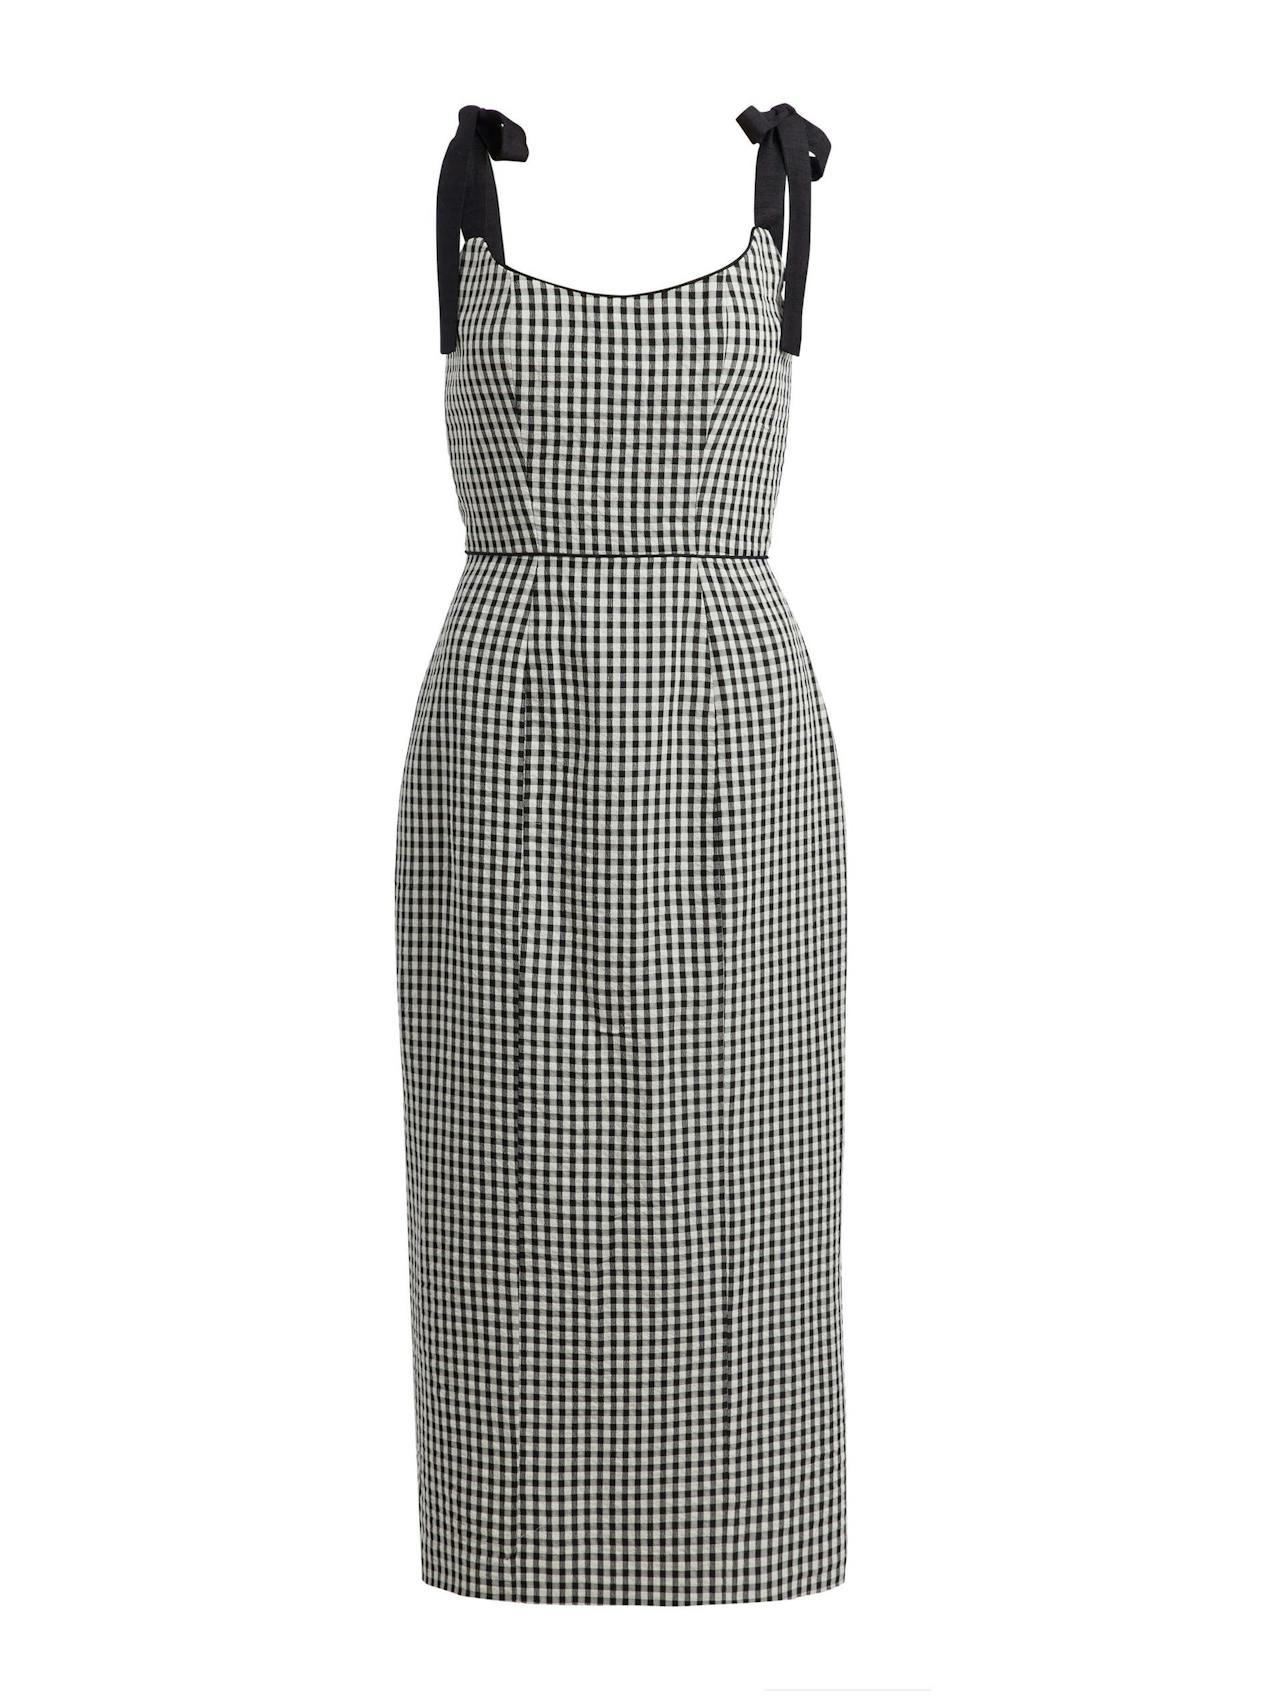 Presley black and white gingham corset dress